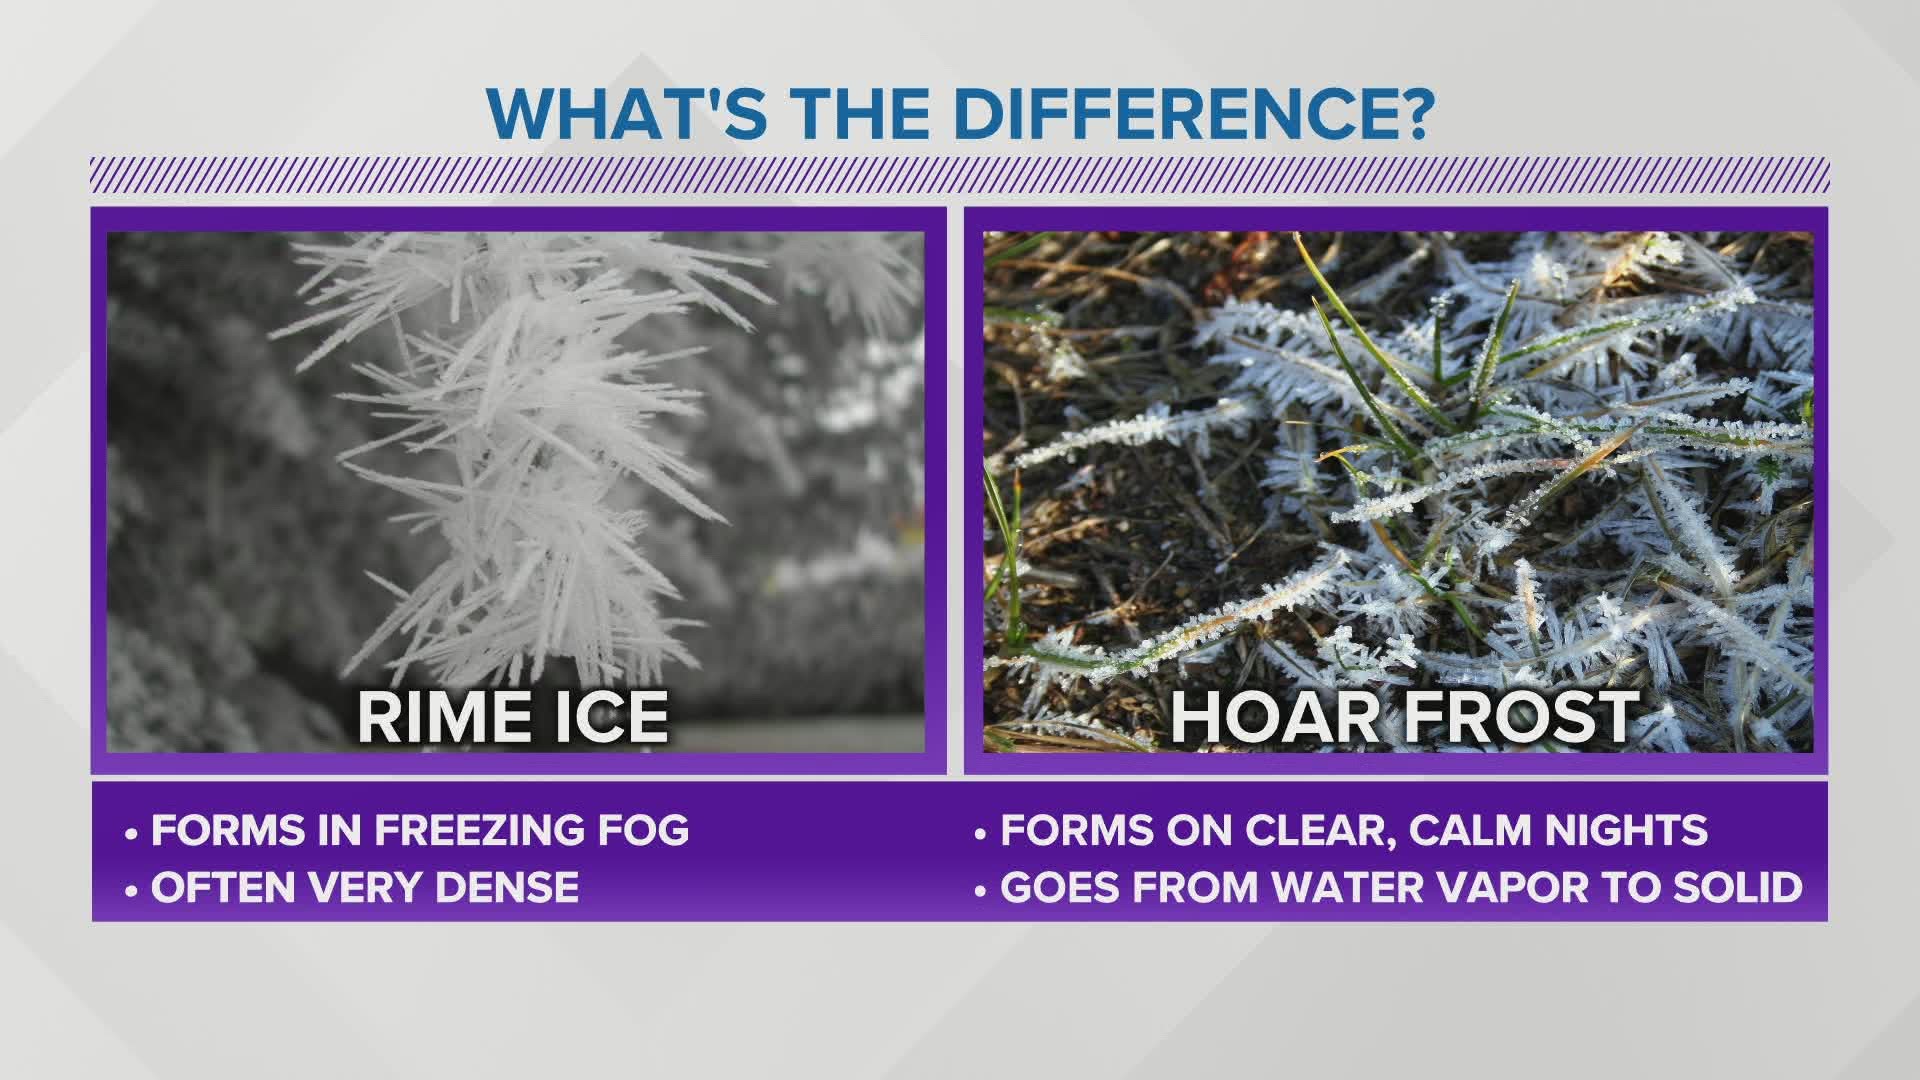 The difference between hoar frost and rime ice